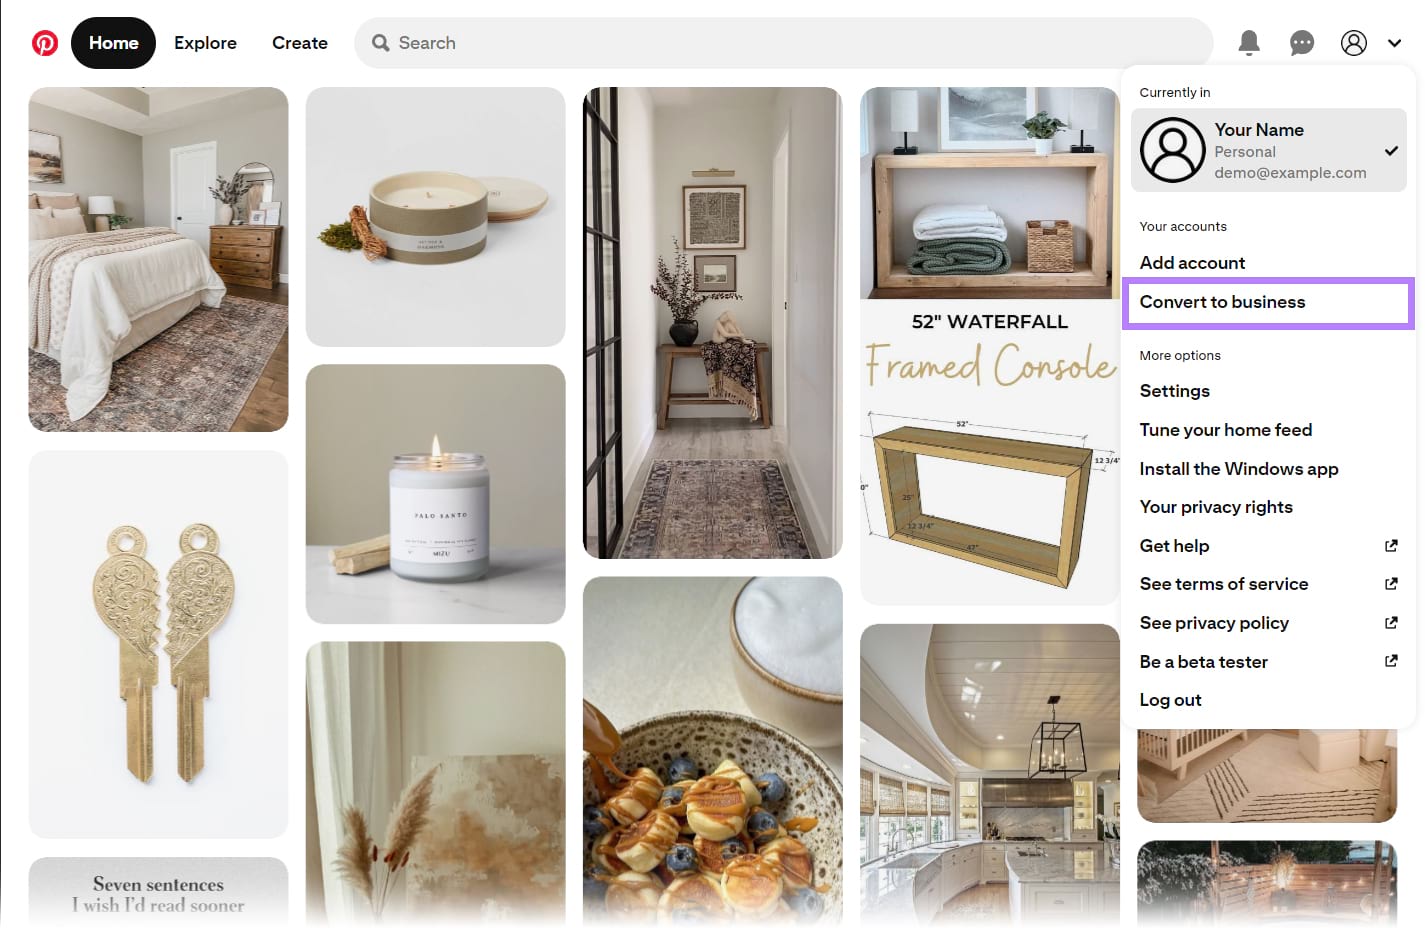 Pinterest dashboard showing the option to convert your personal account to a business account.